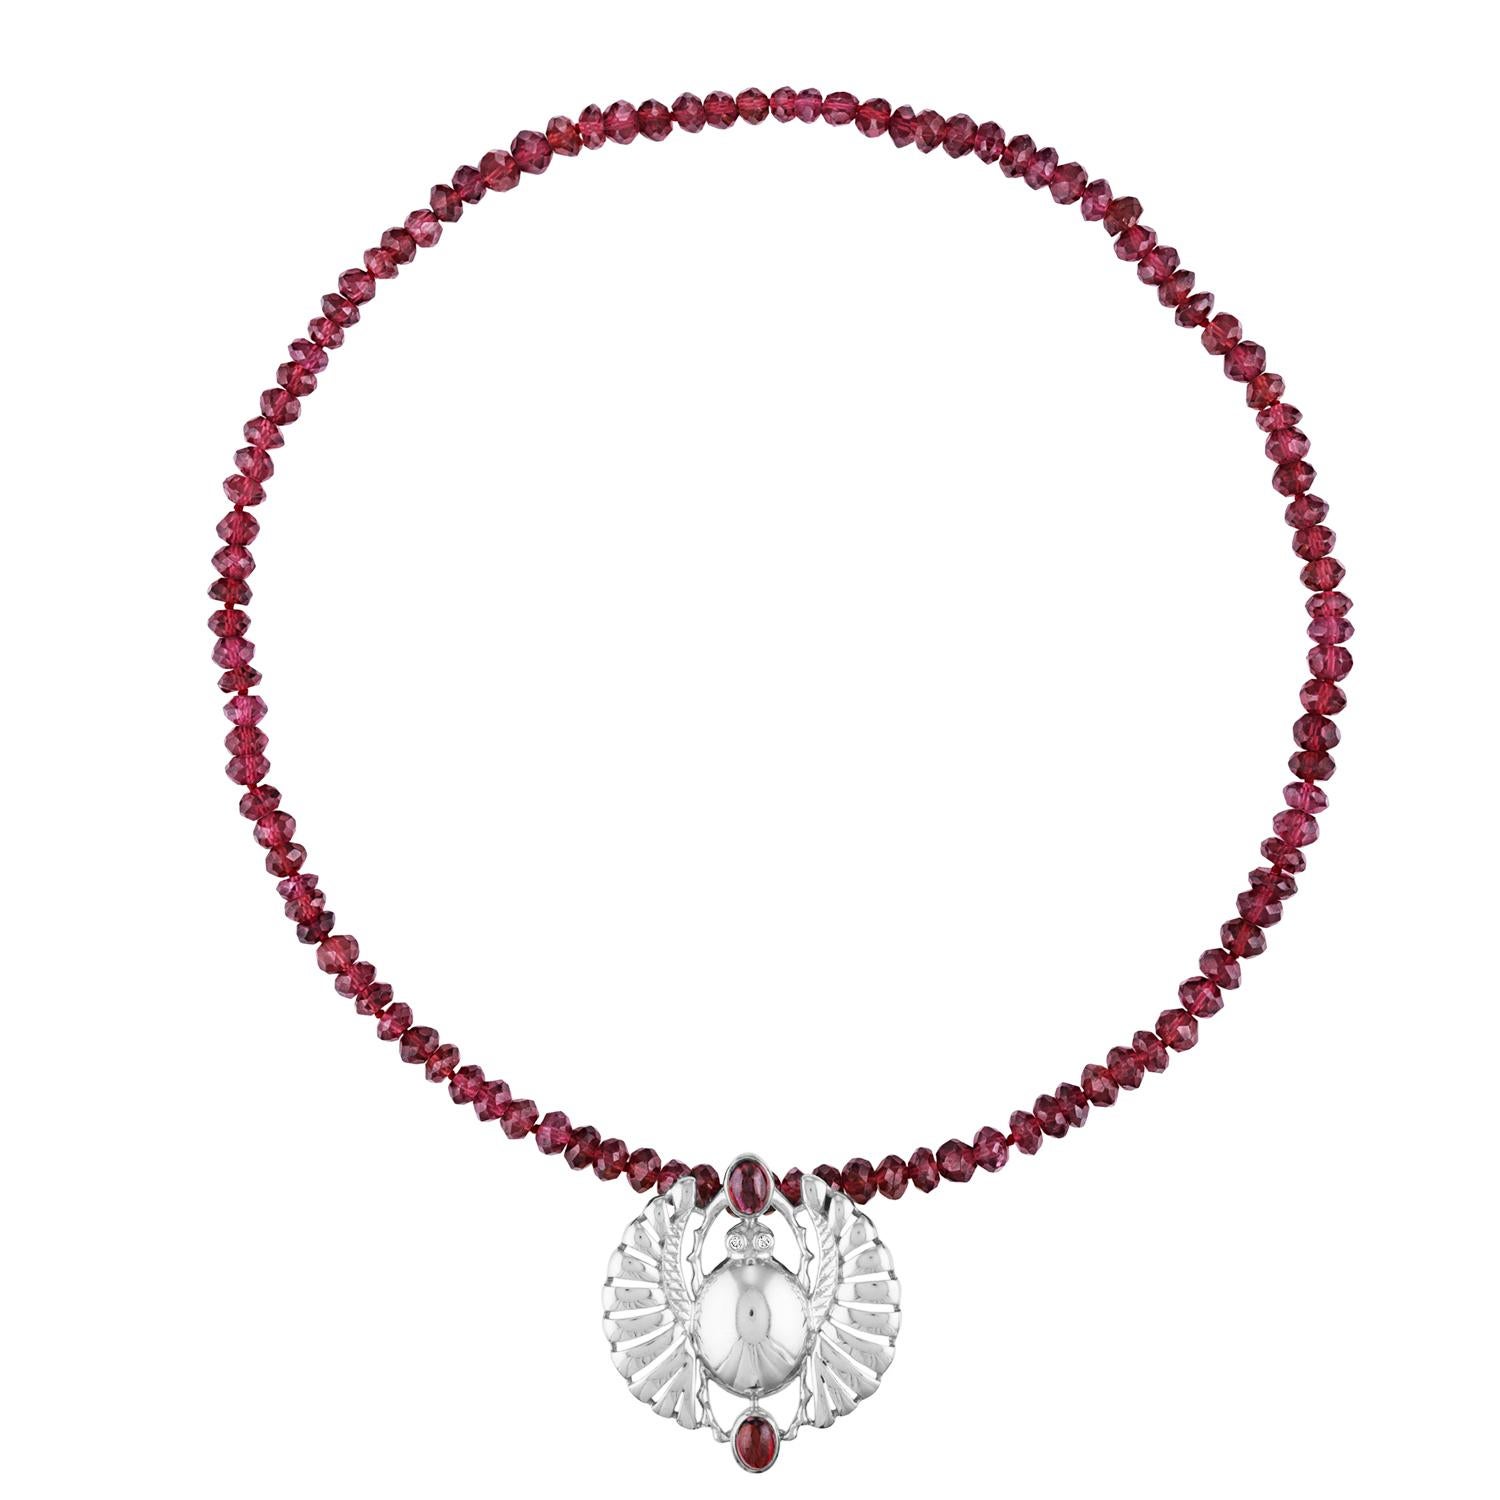 Women's Rashida Winged Scarab Necklace with Red Garnet Beads & 18K Gold Vermeil Pendant For Sale